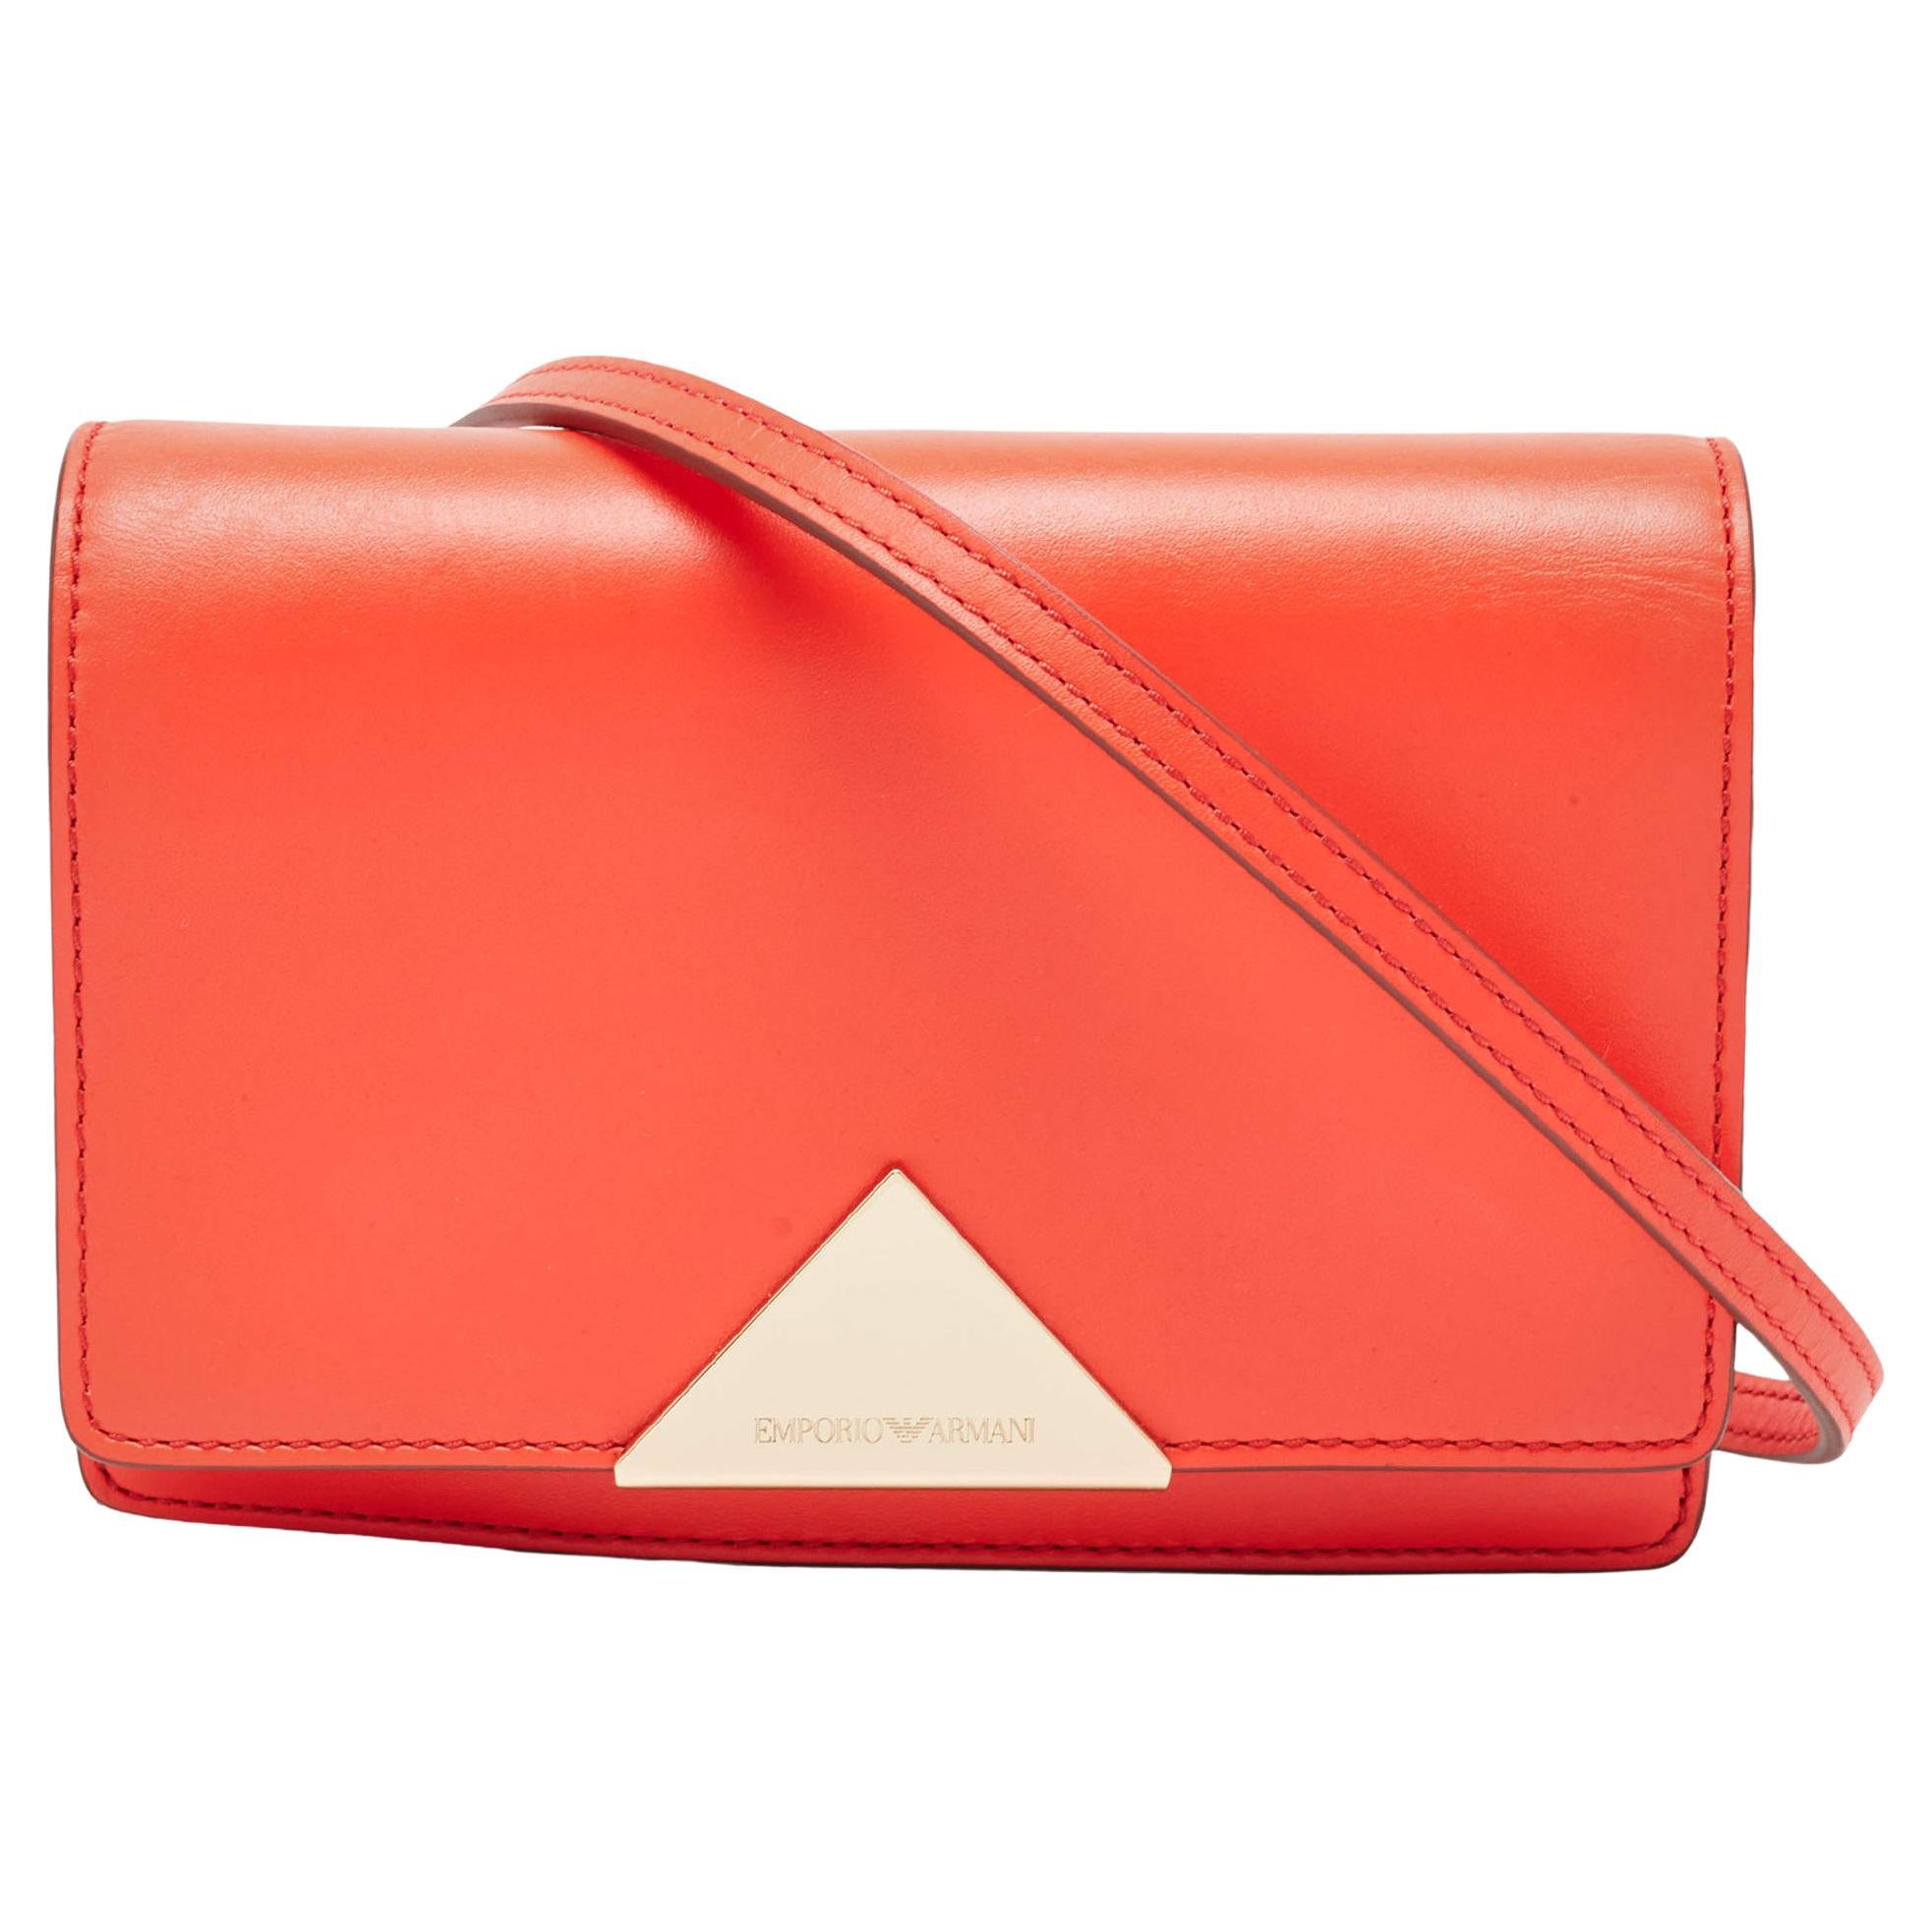 Emporio Armani Neon Red Leather Flap Crossbody Bag For Sale